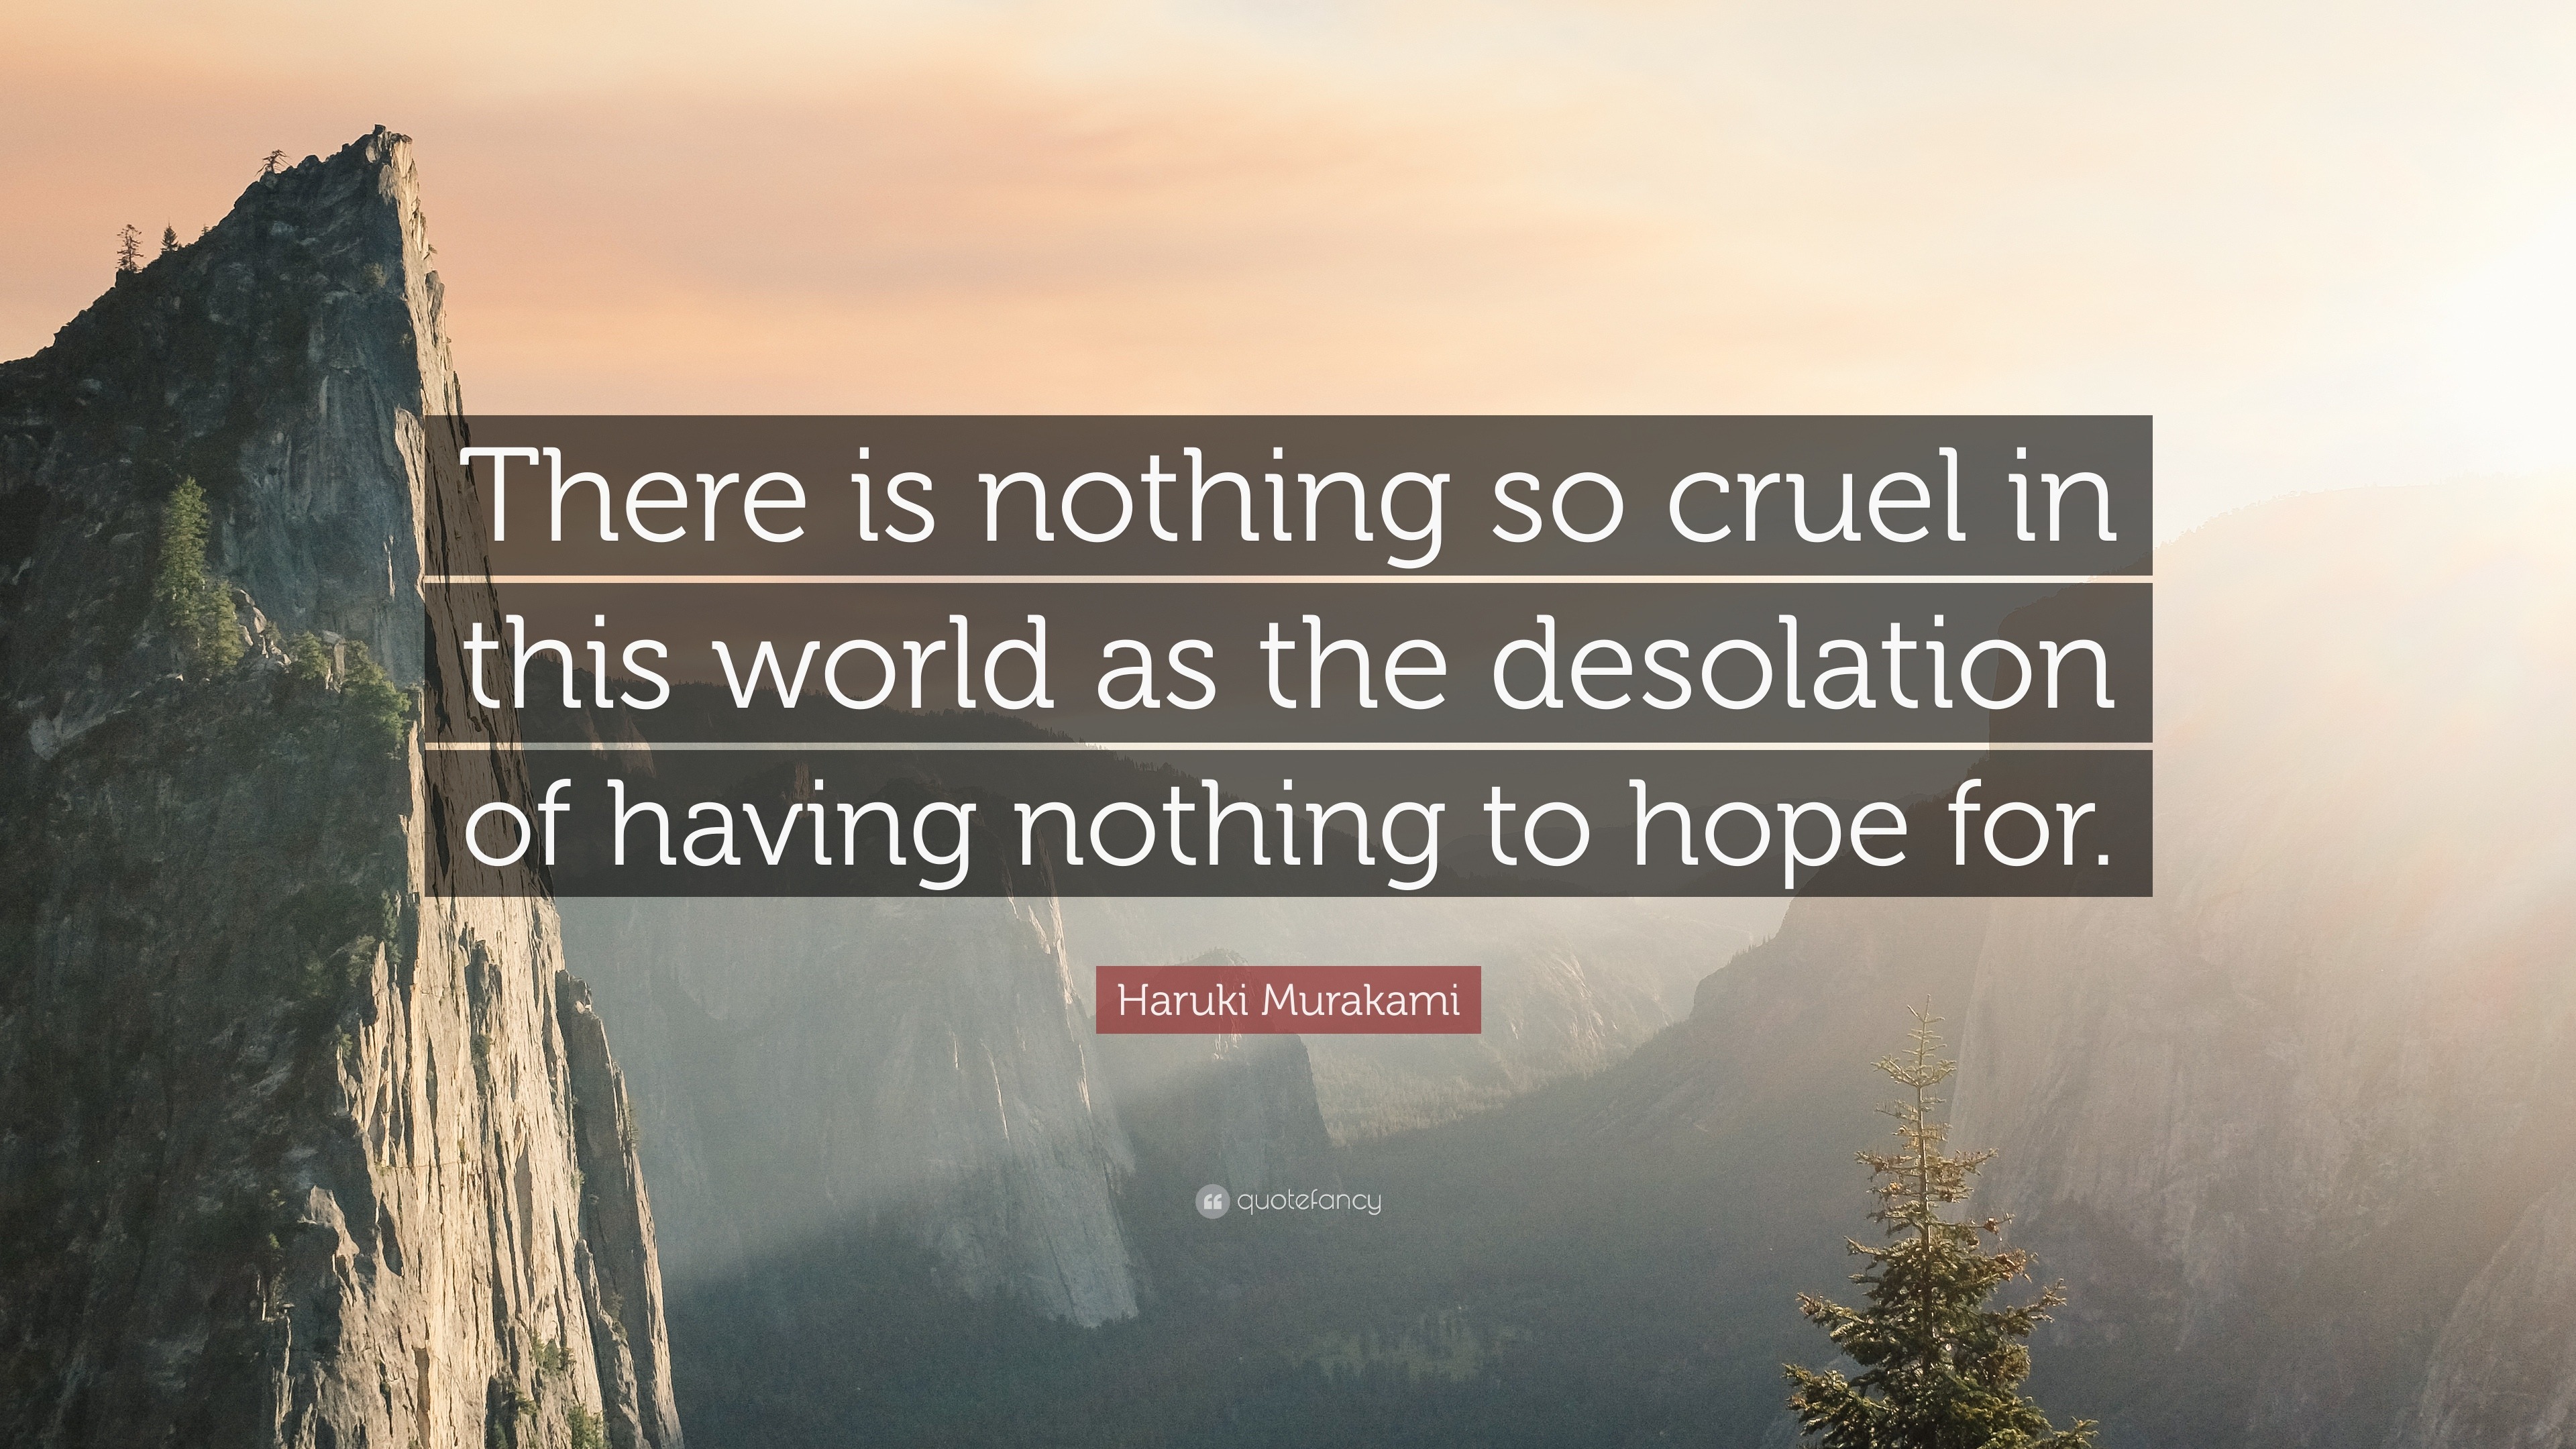 Haruki Murakami Quote: “There is nothing so cruel in this world as the  desolation of having